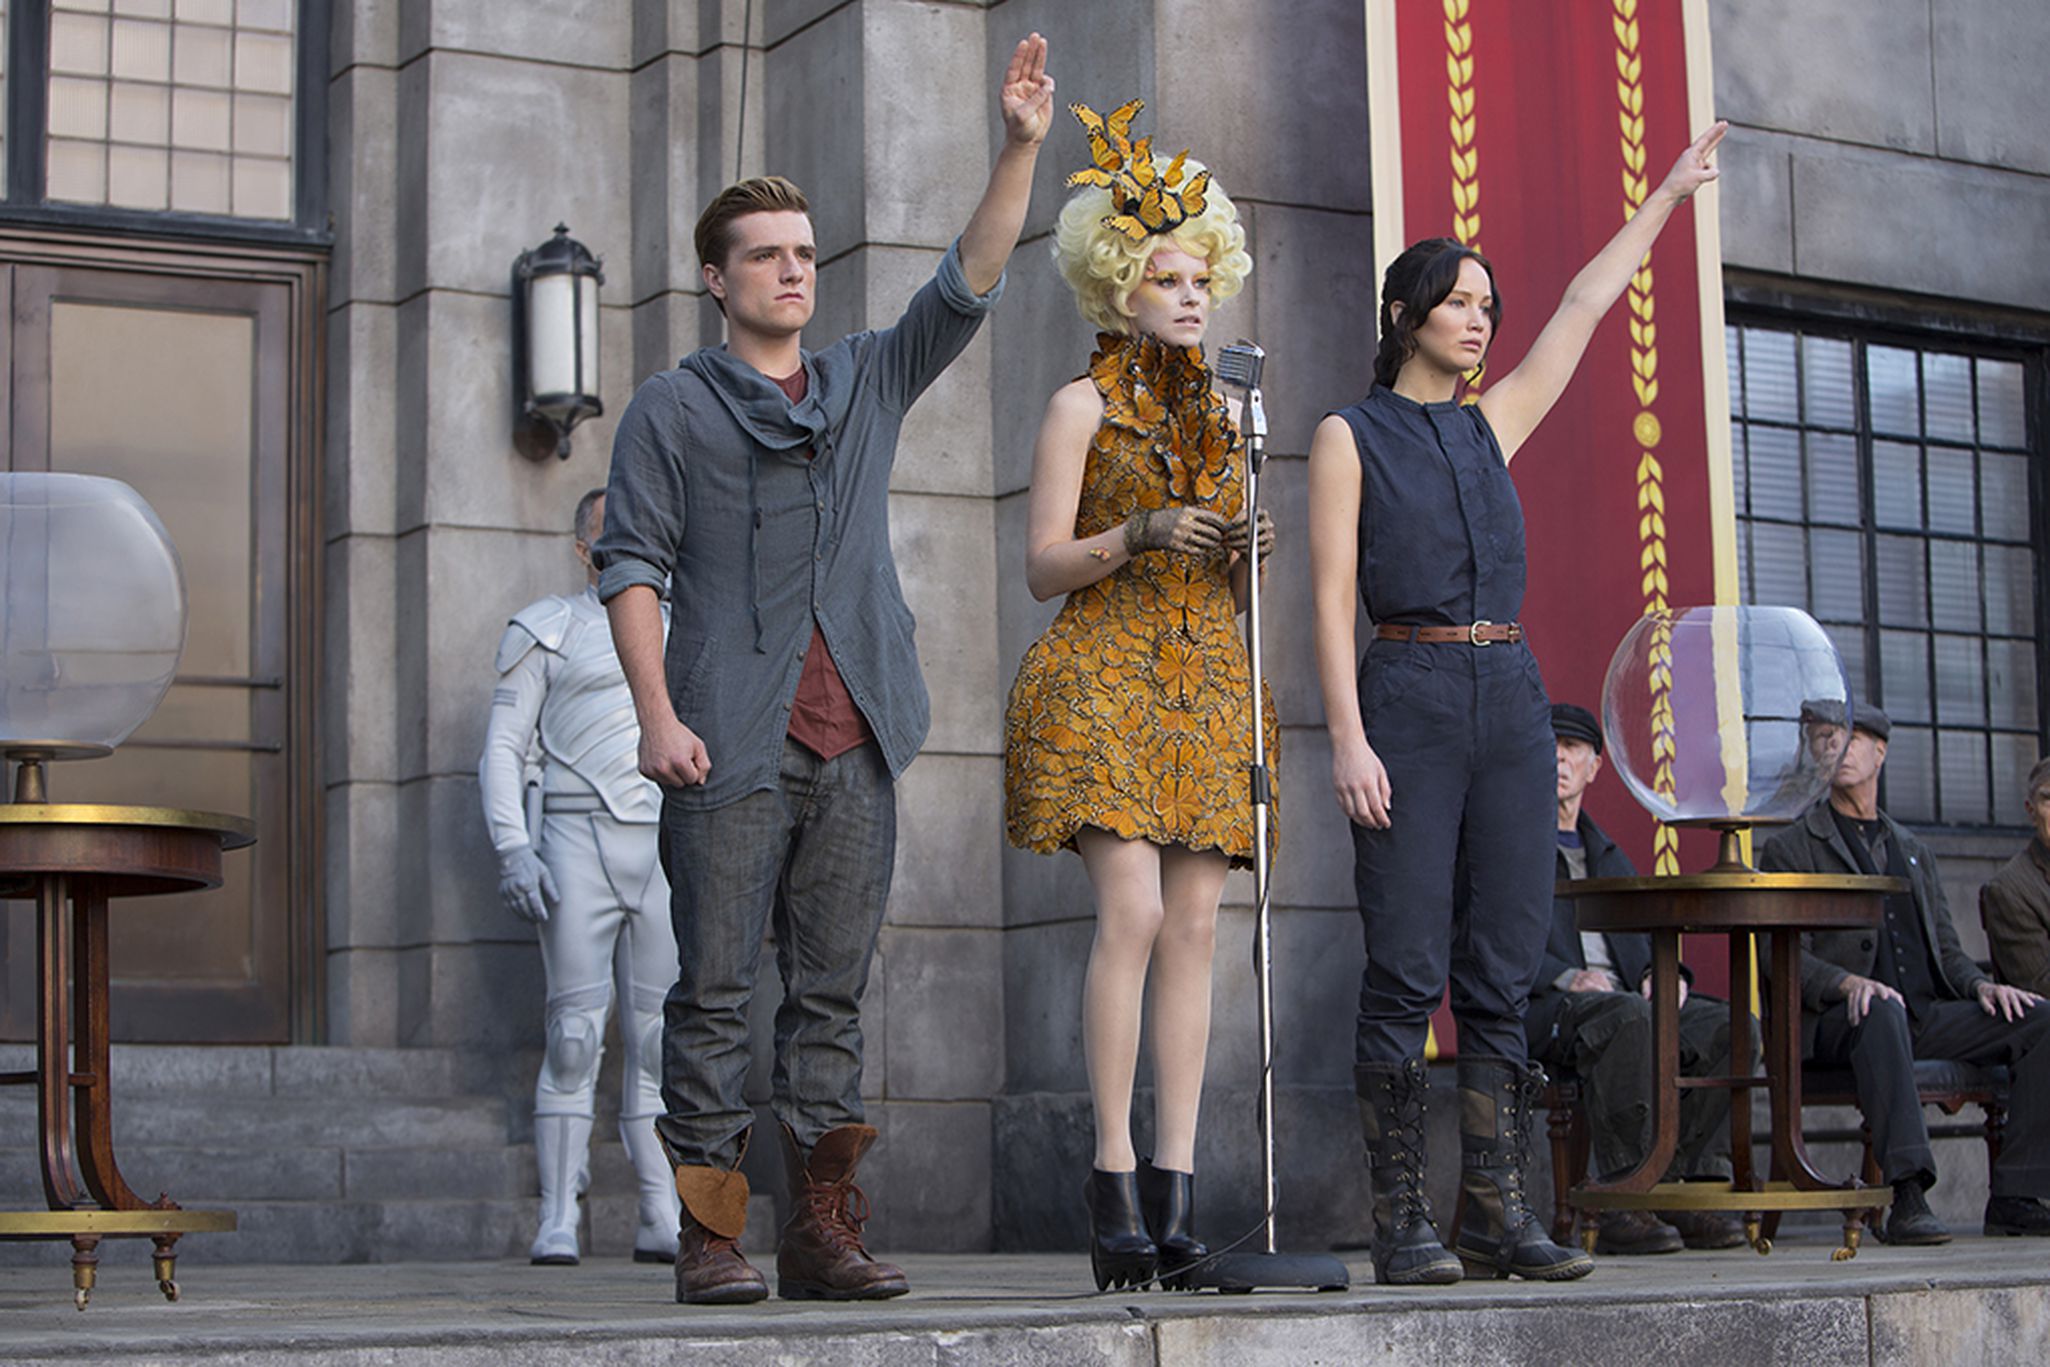 New Twists Ahead: What's Next for The Hunger Games Fans After 'Songbirds and Snakes' Surprise